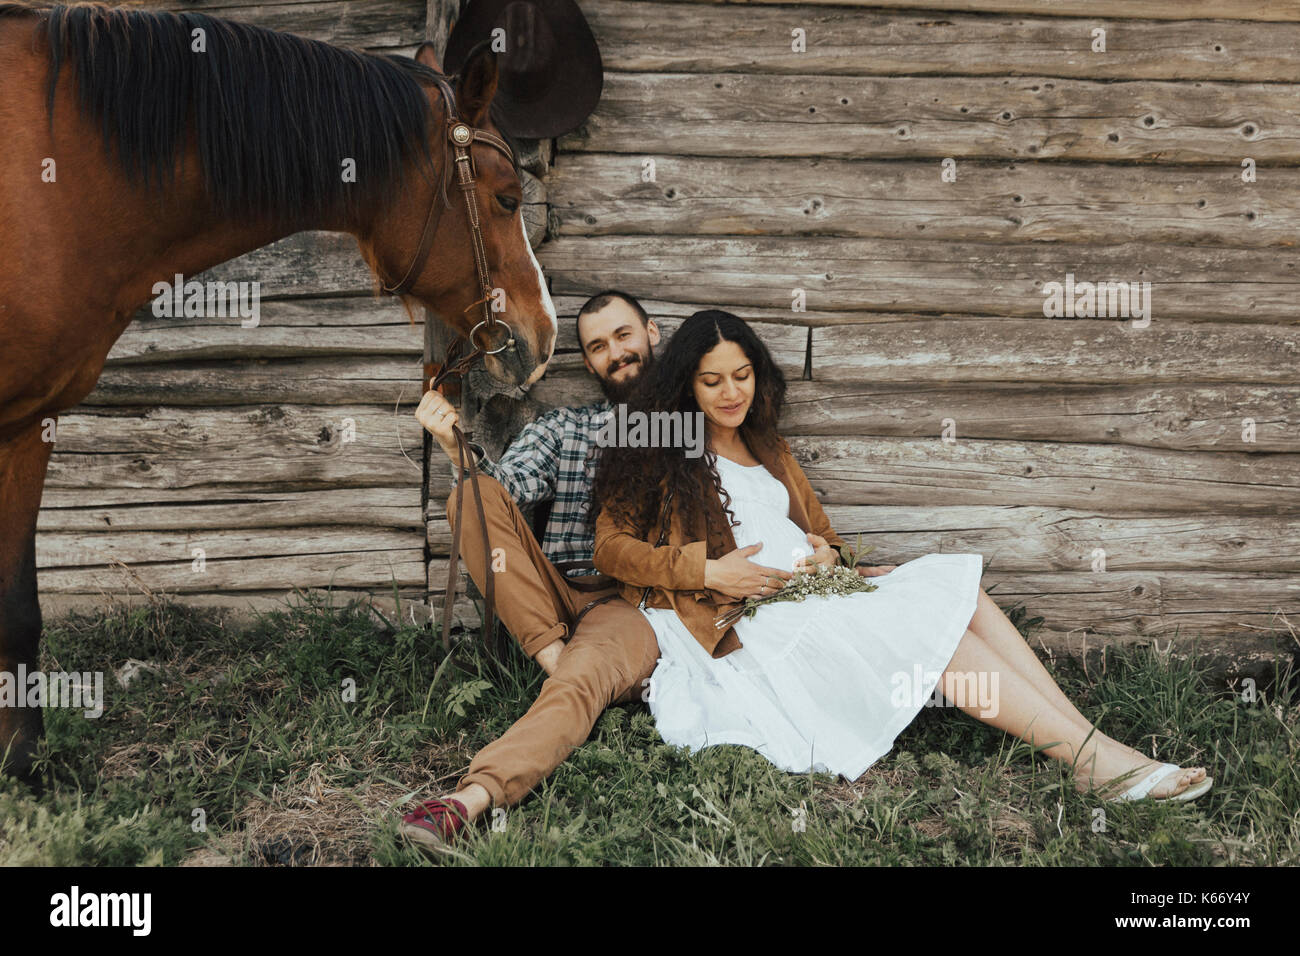 Couple sitting in grass near barn with horse Stock Photo